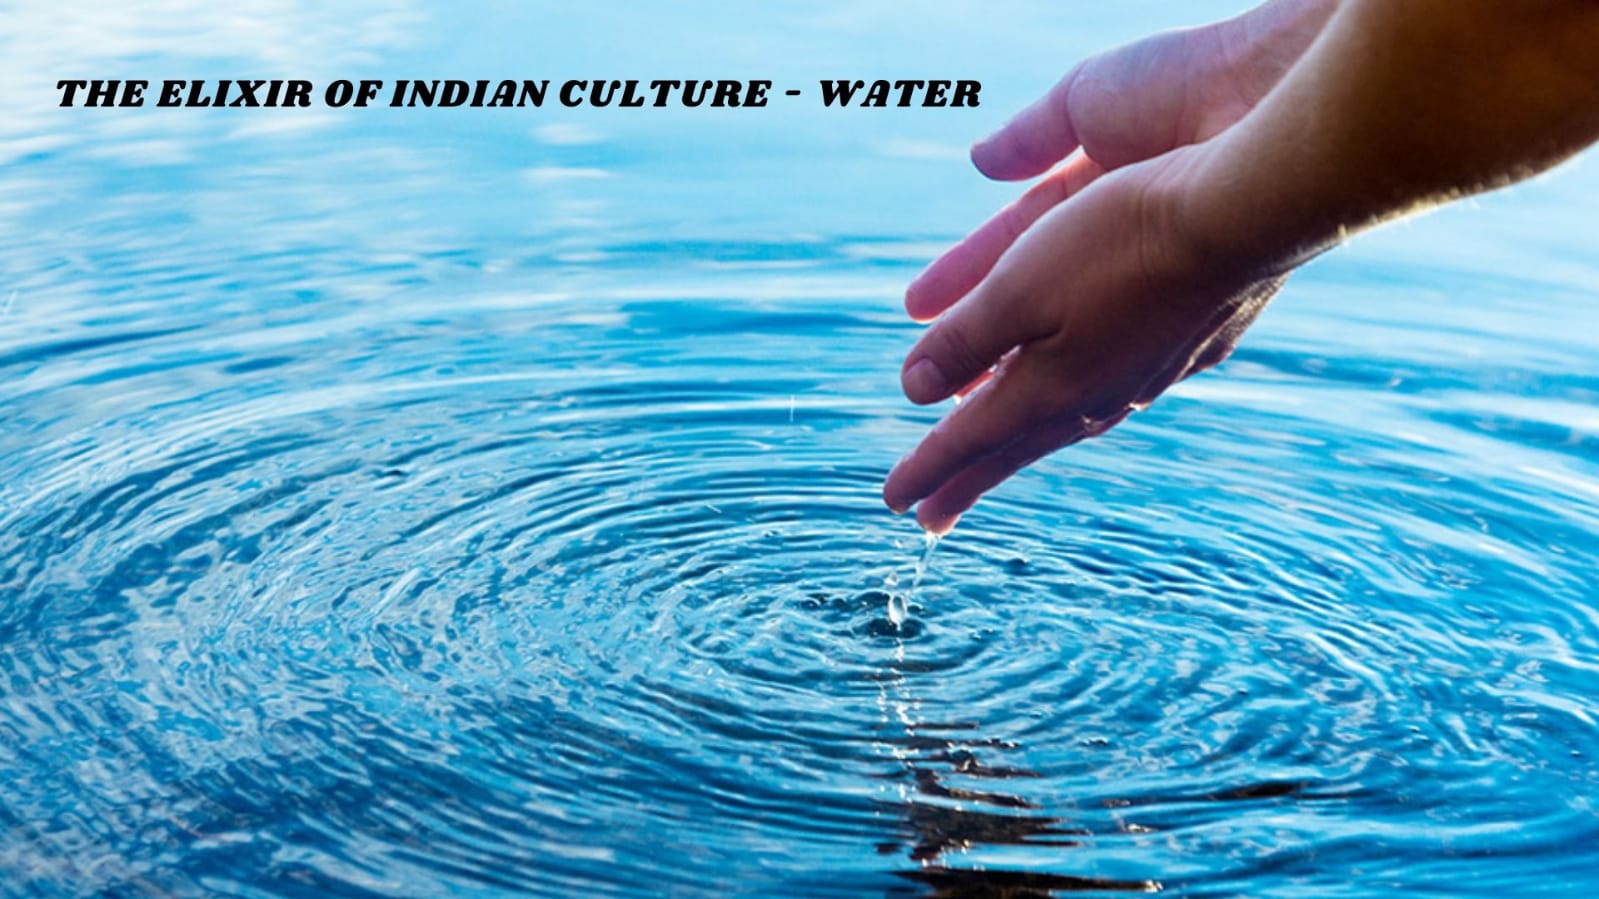 The Elixir of Indian Culture - Water